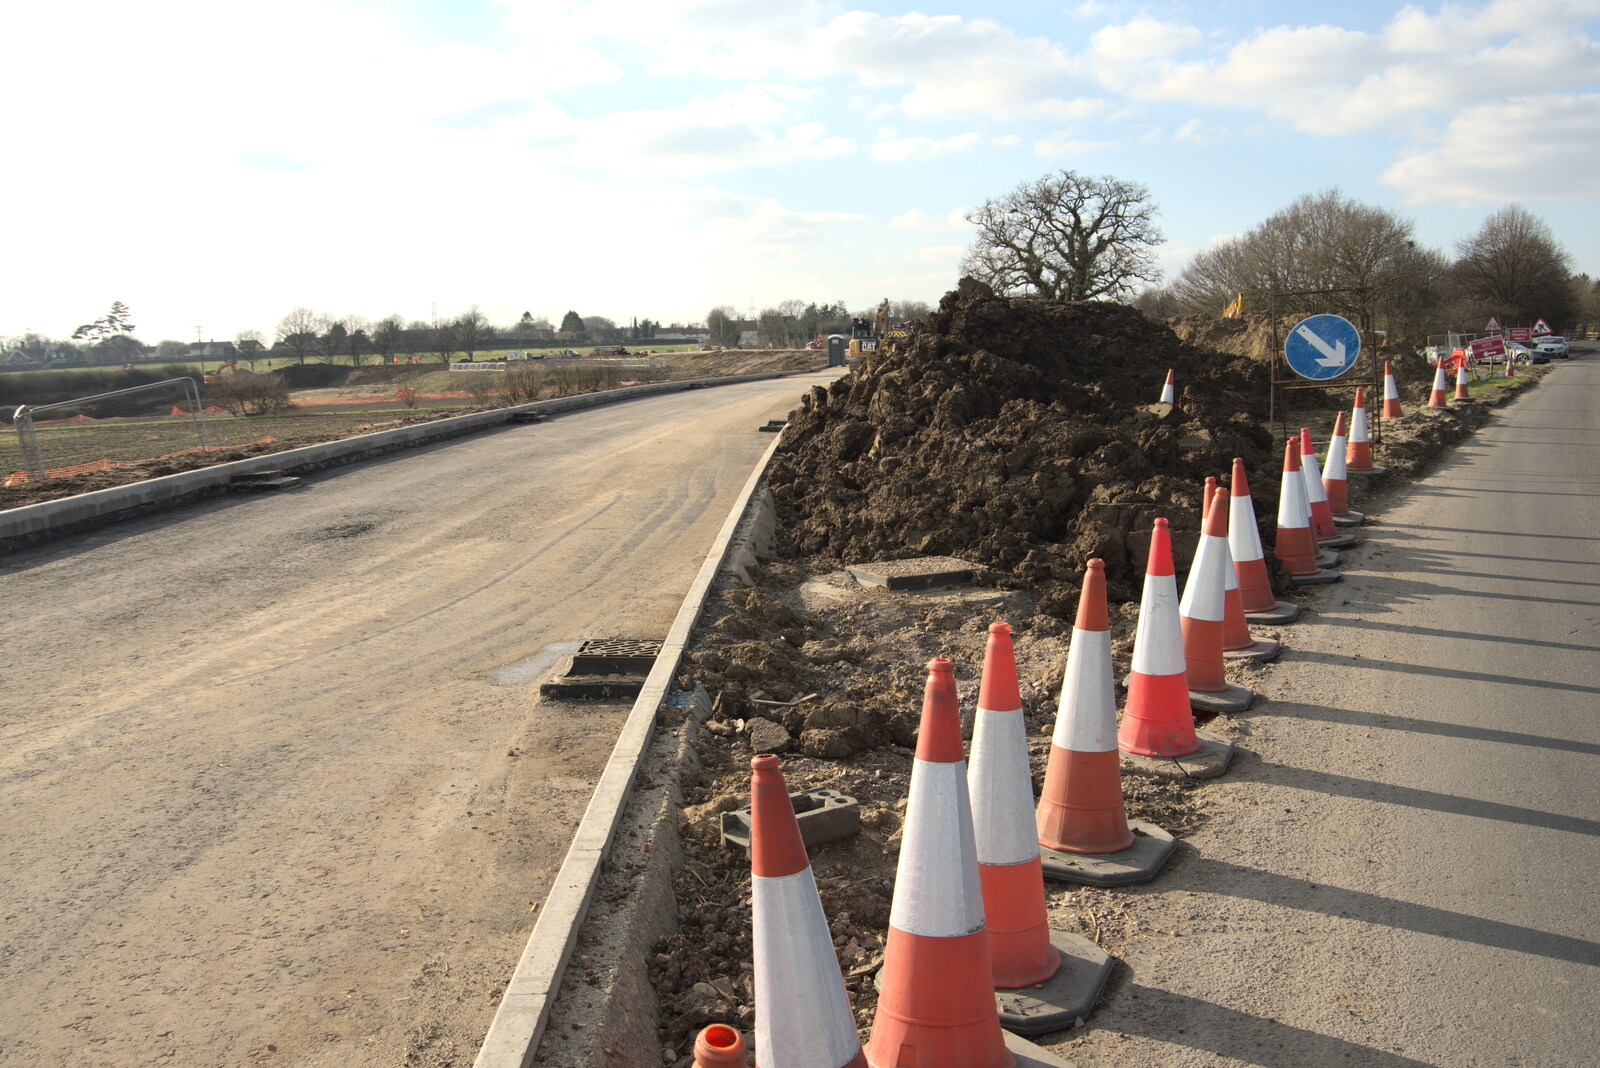 The new Castleton Way, on the left from Fred's New Bike and an A140 Closure, Brome, Suffolk - 27th February 2021